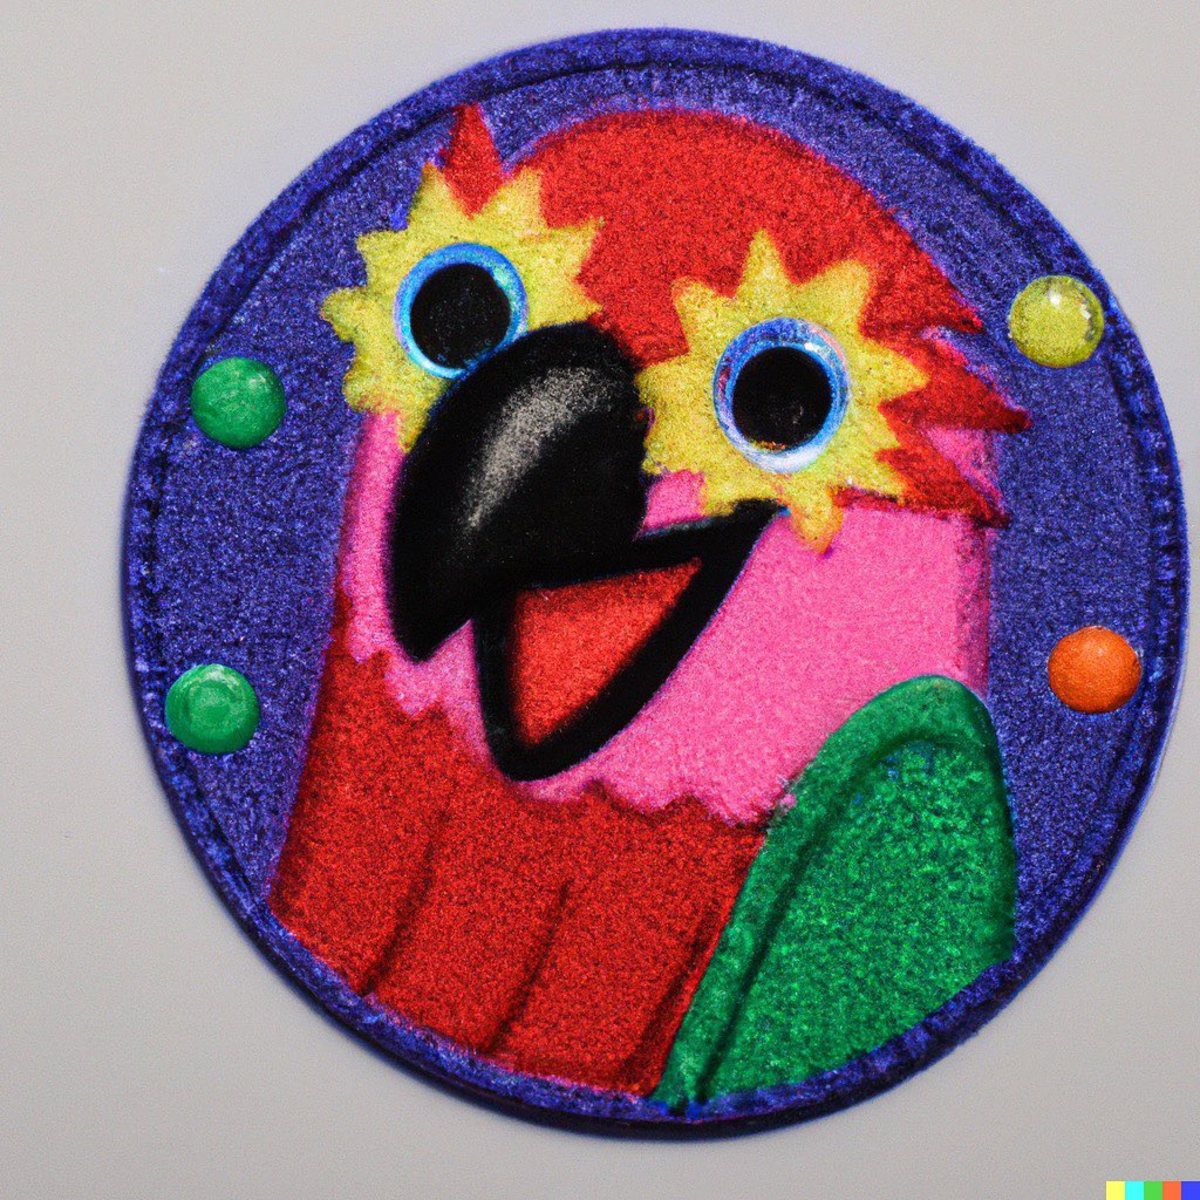 A photo of an embroidered patch of Party Parrot emoji (Actual text prompt used) Not a real patch; the whole image was generated from scratch by DALL-E